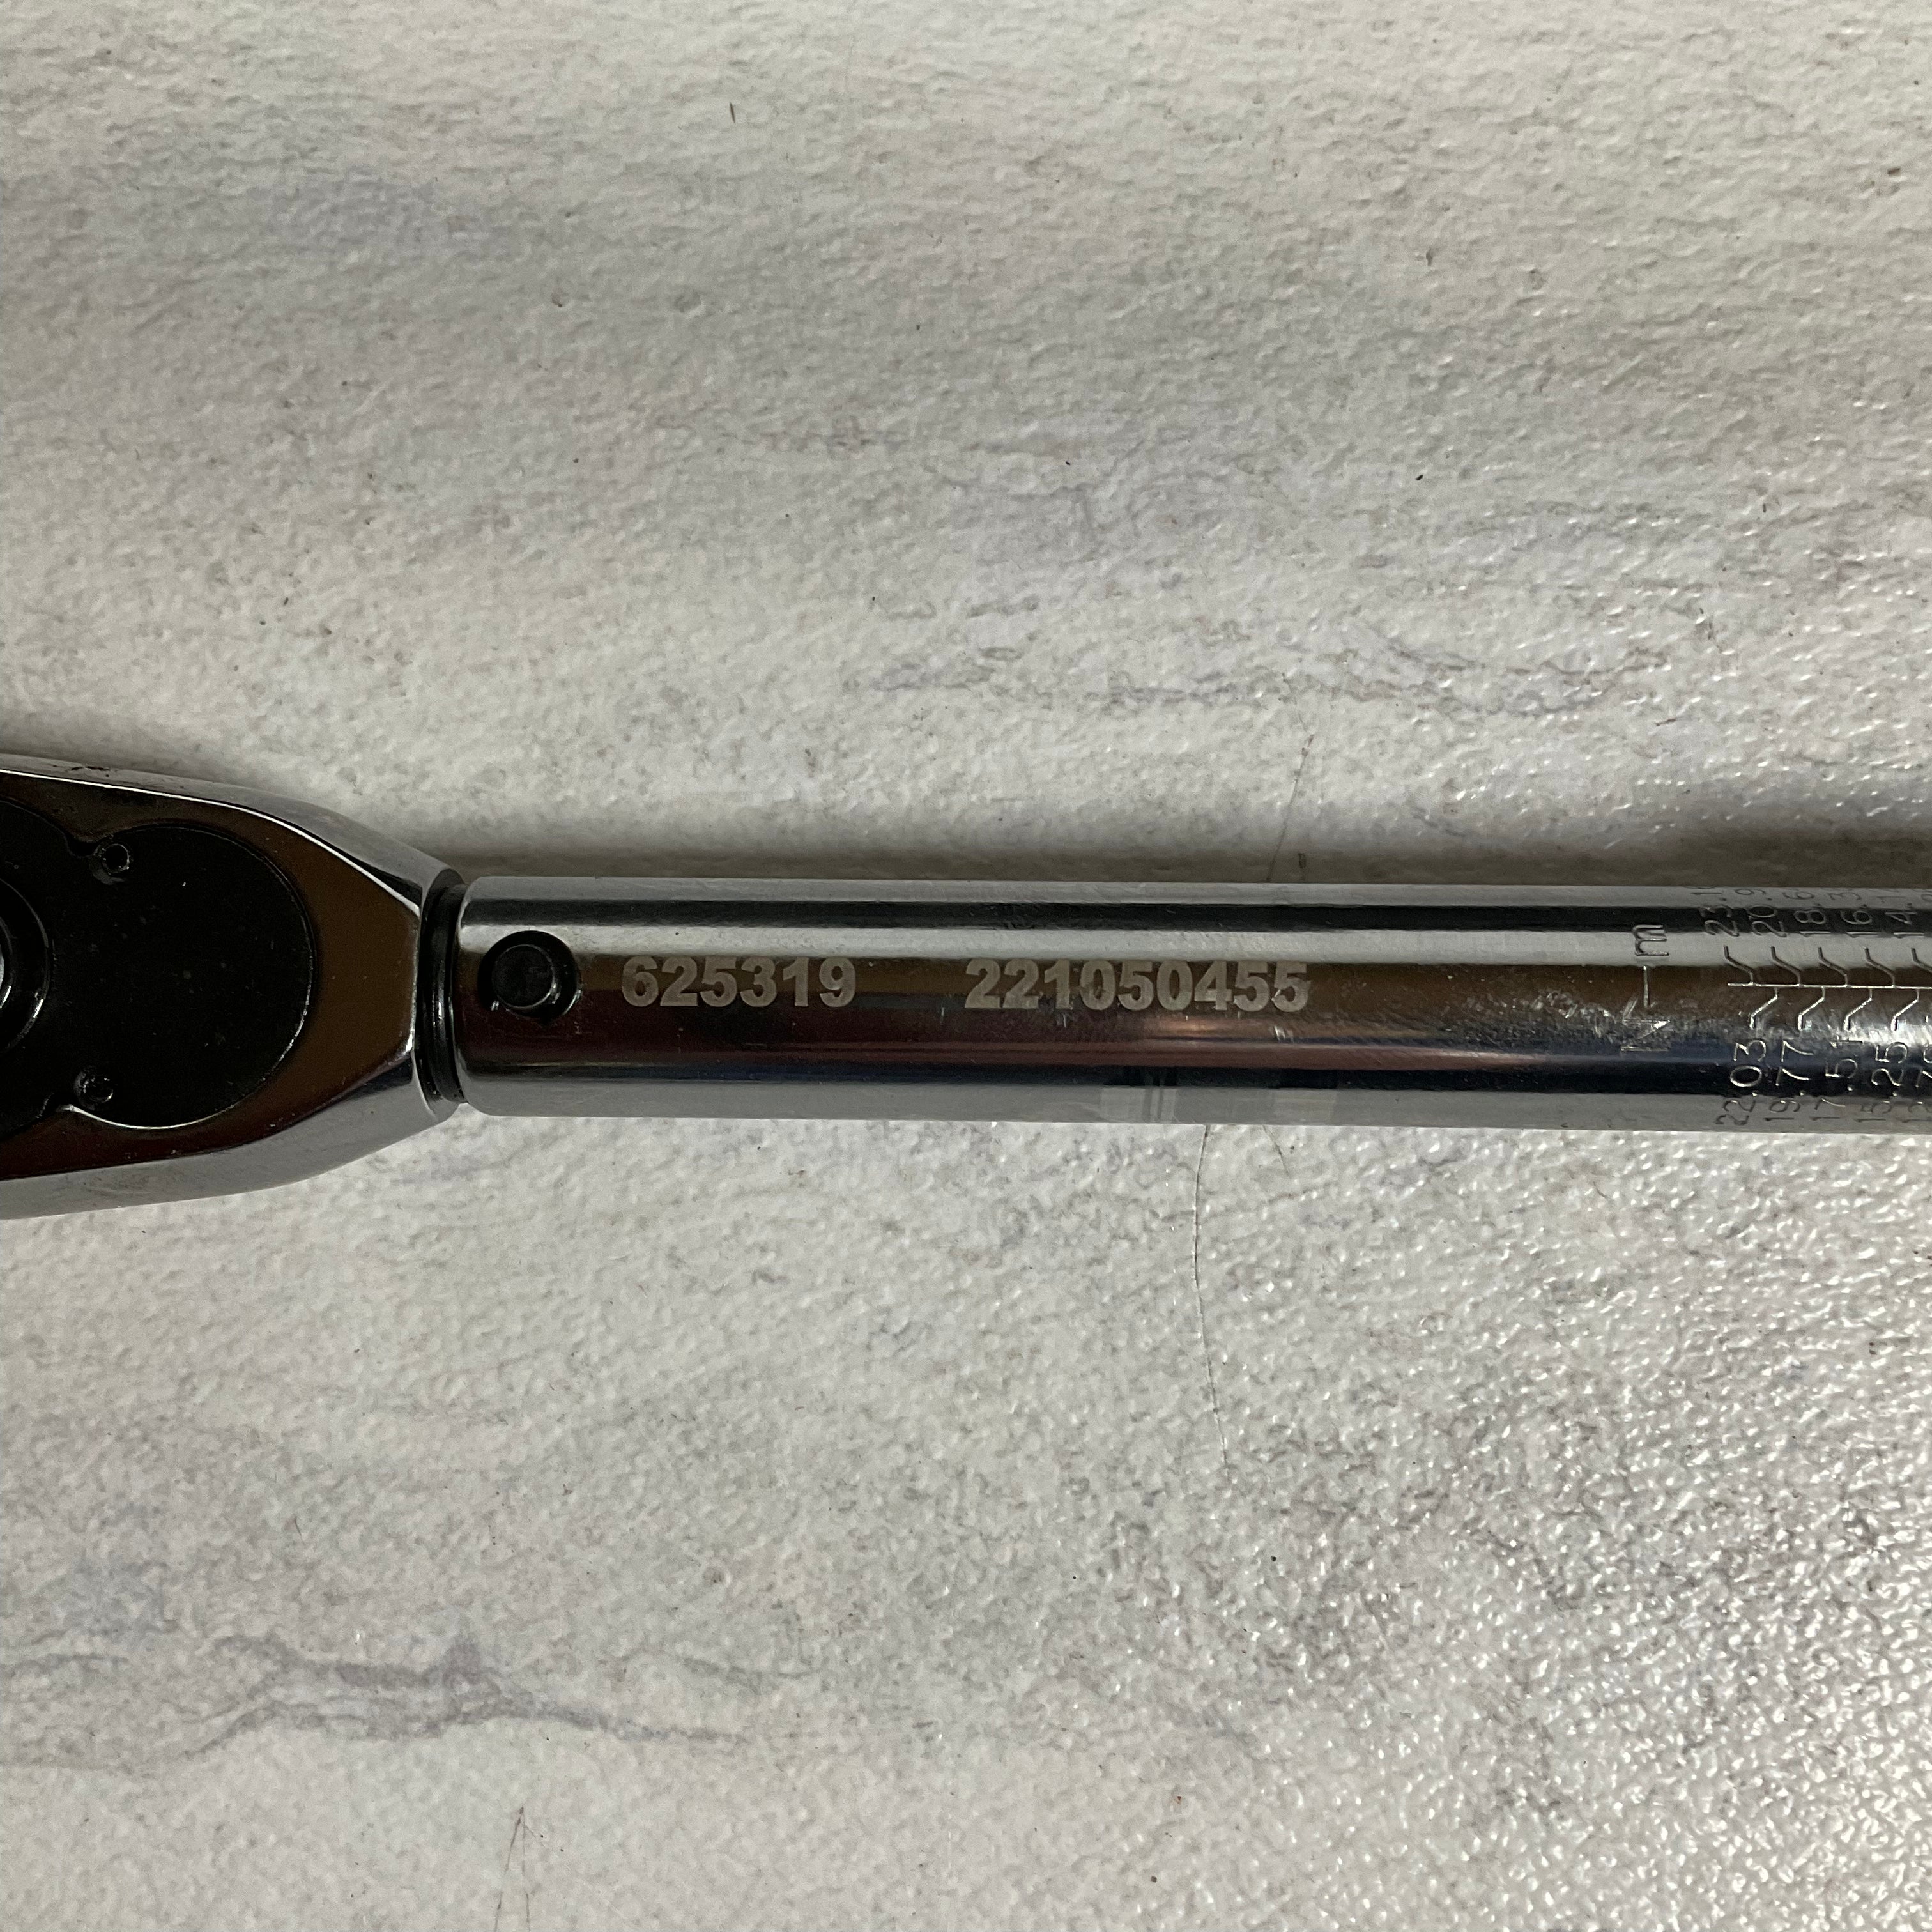 HUSKY Torque Wrench 40-200 in lbs 1/4